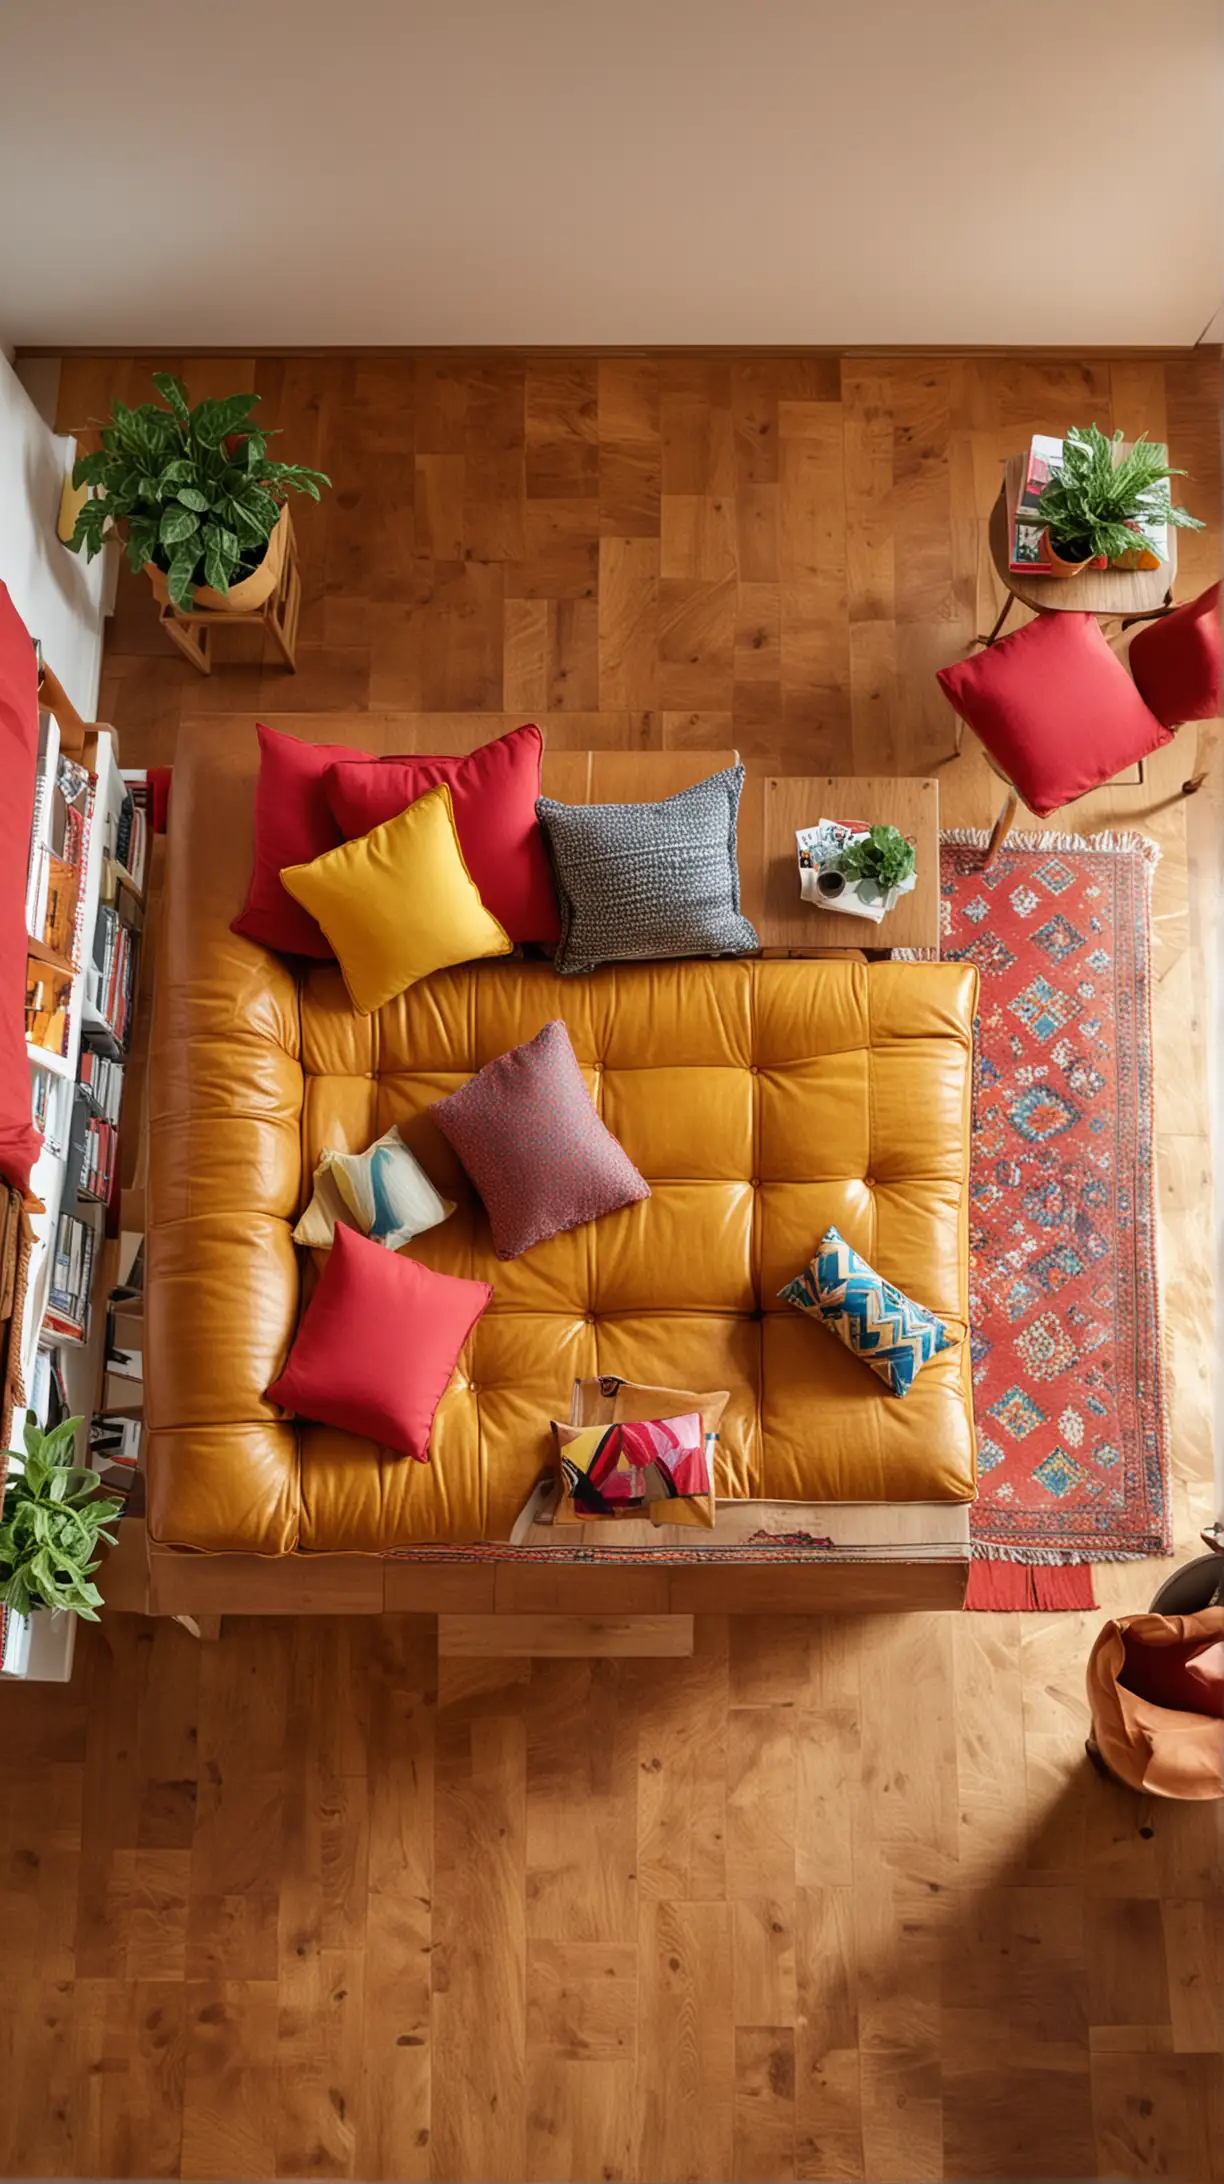 Stylish Living Room with Vibrant Cognac Leather Couch and Colorful Accents